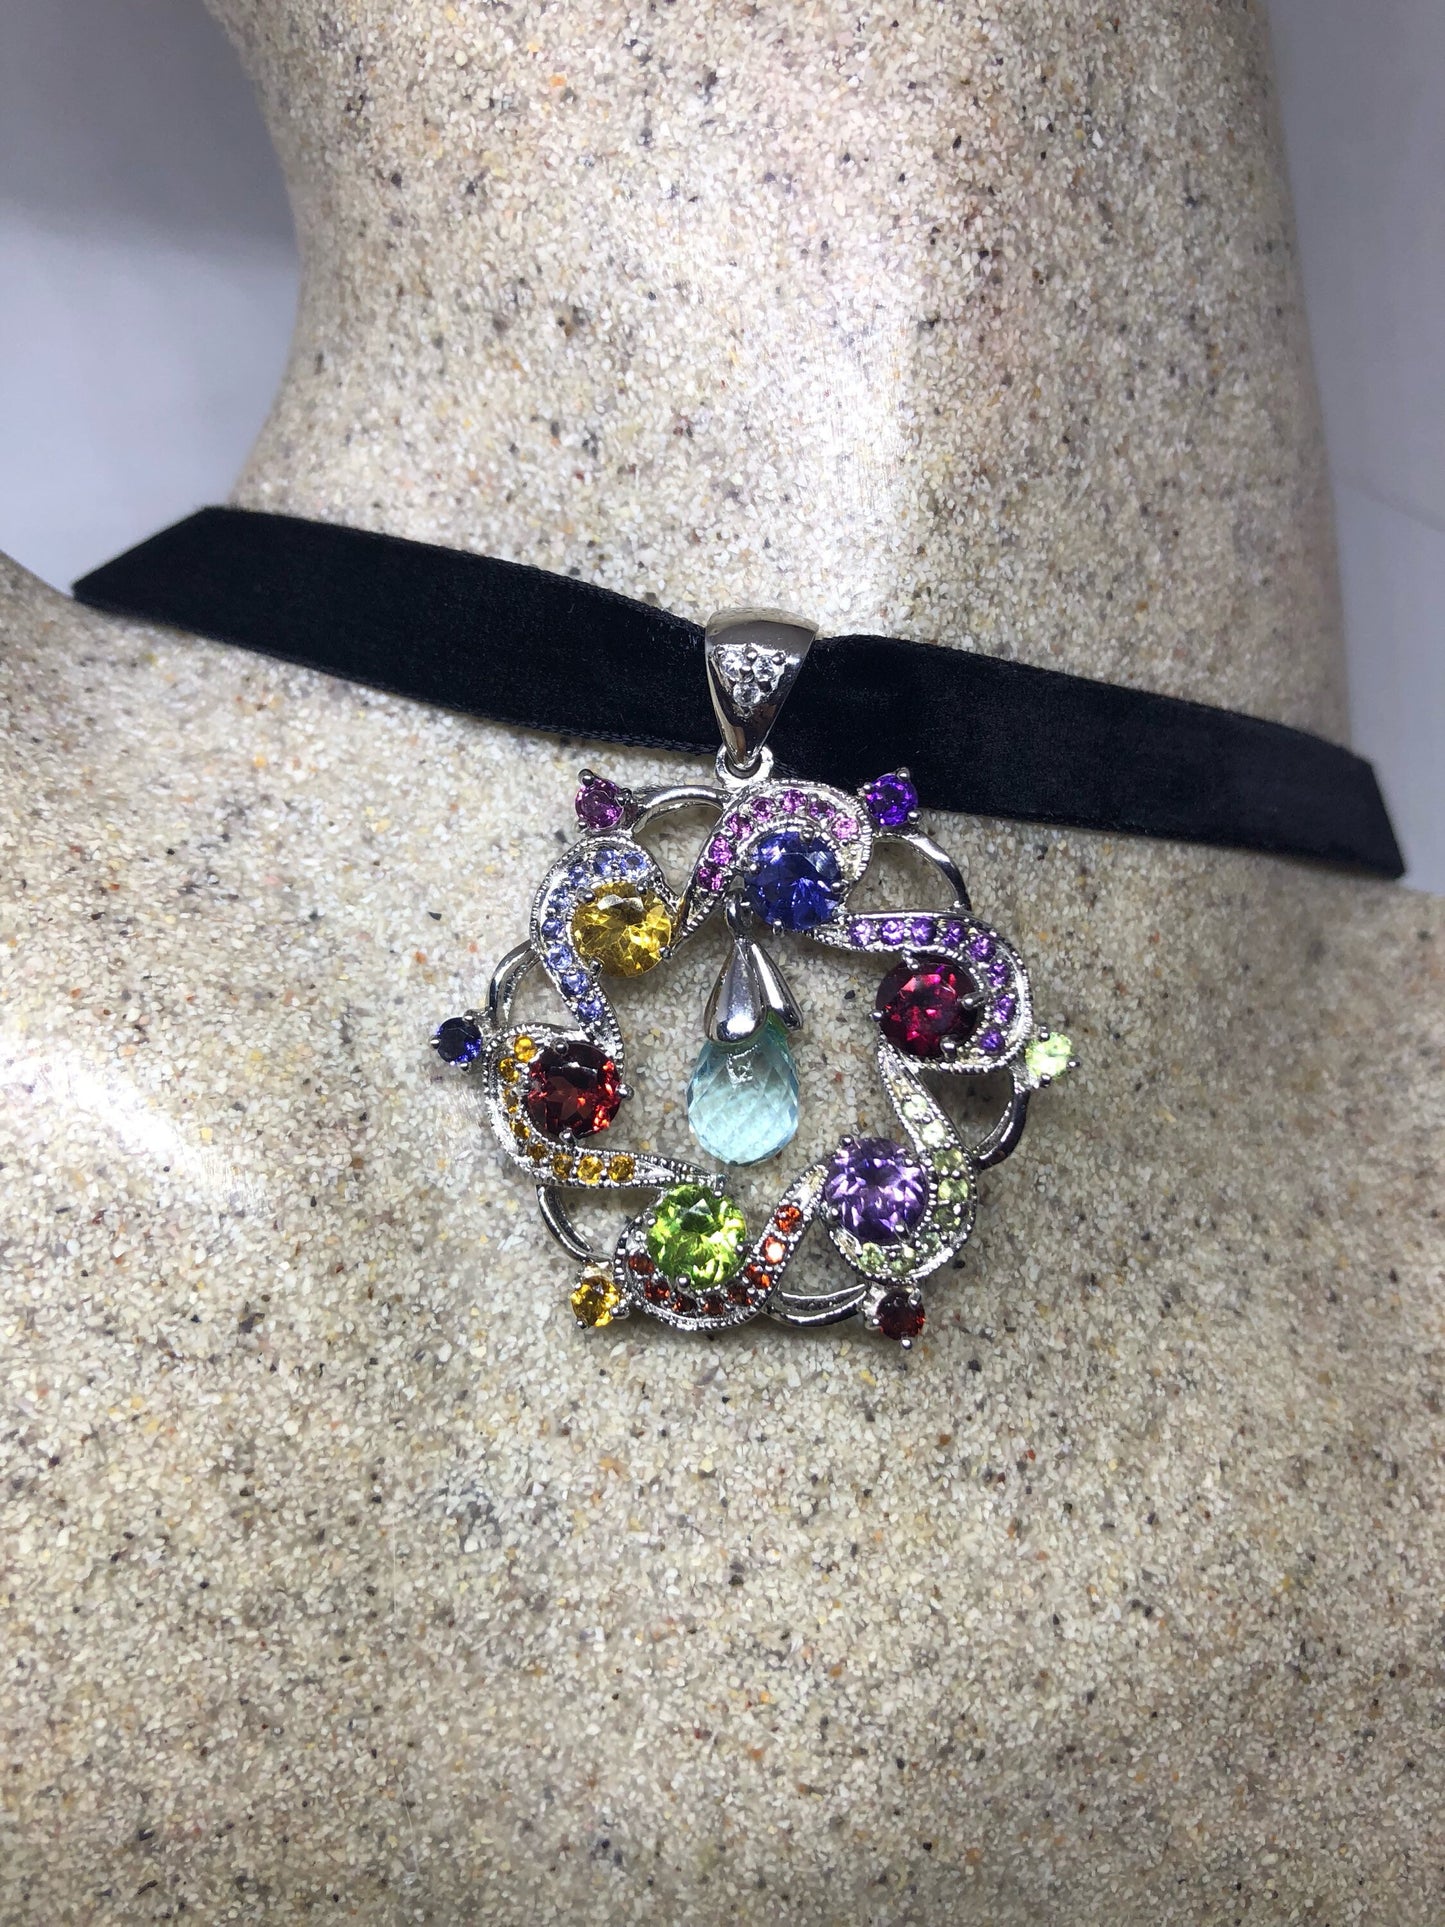 Vintage Handmade 925 Sterling Silver Genuine Mixed Colored Gemstone Antique Pendant Necklace